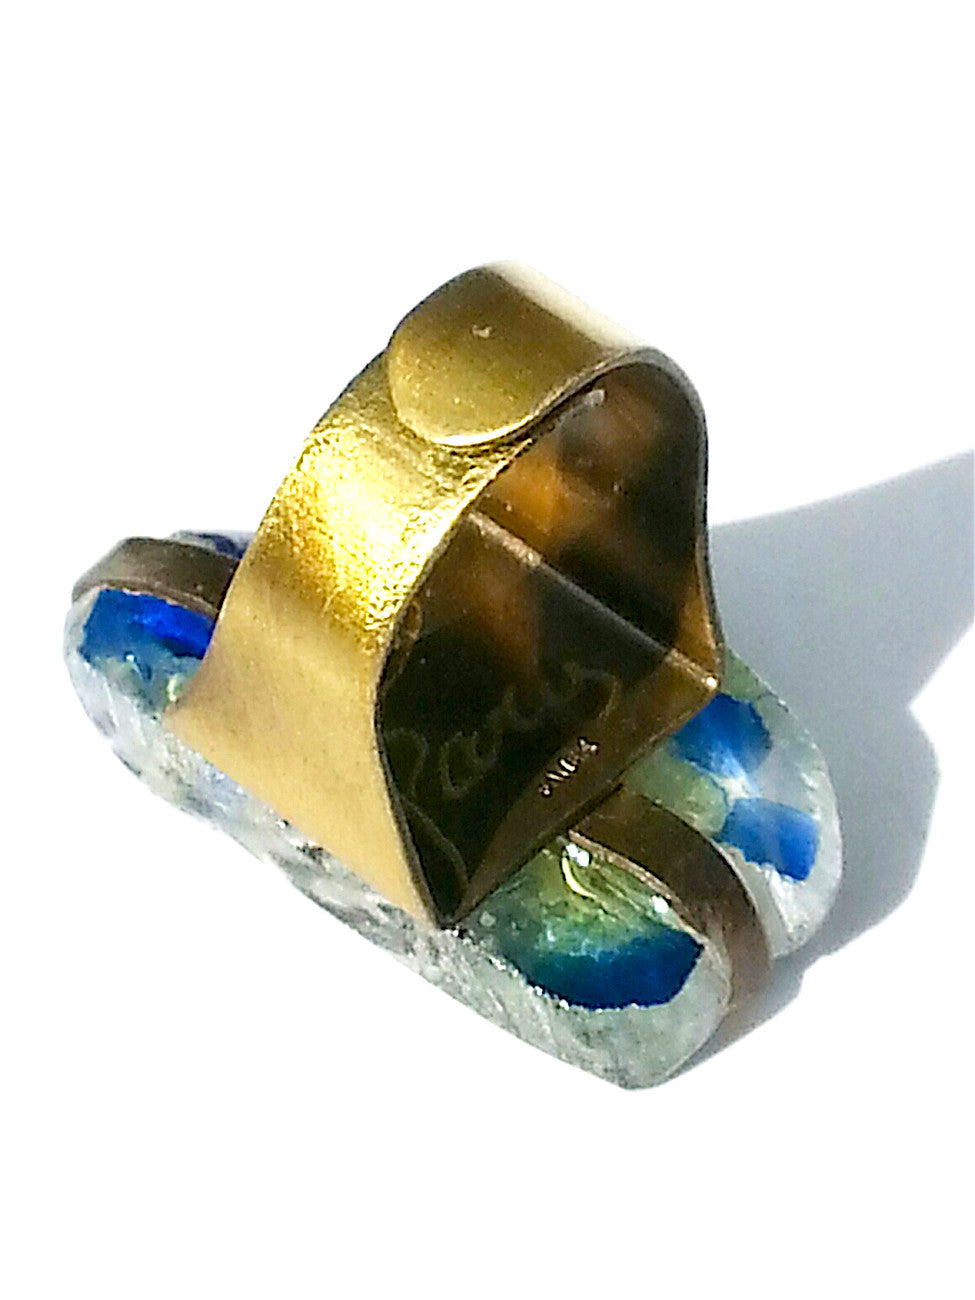 Ring Hand Cast French Glass Floral Blue Yellow